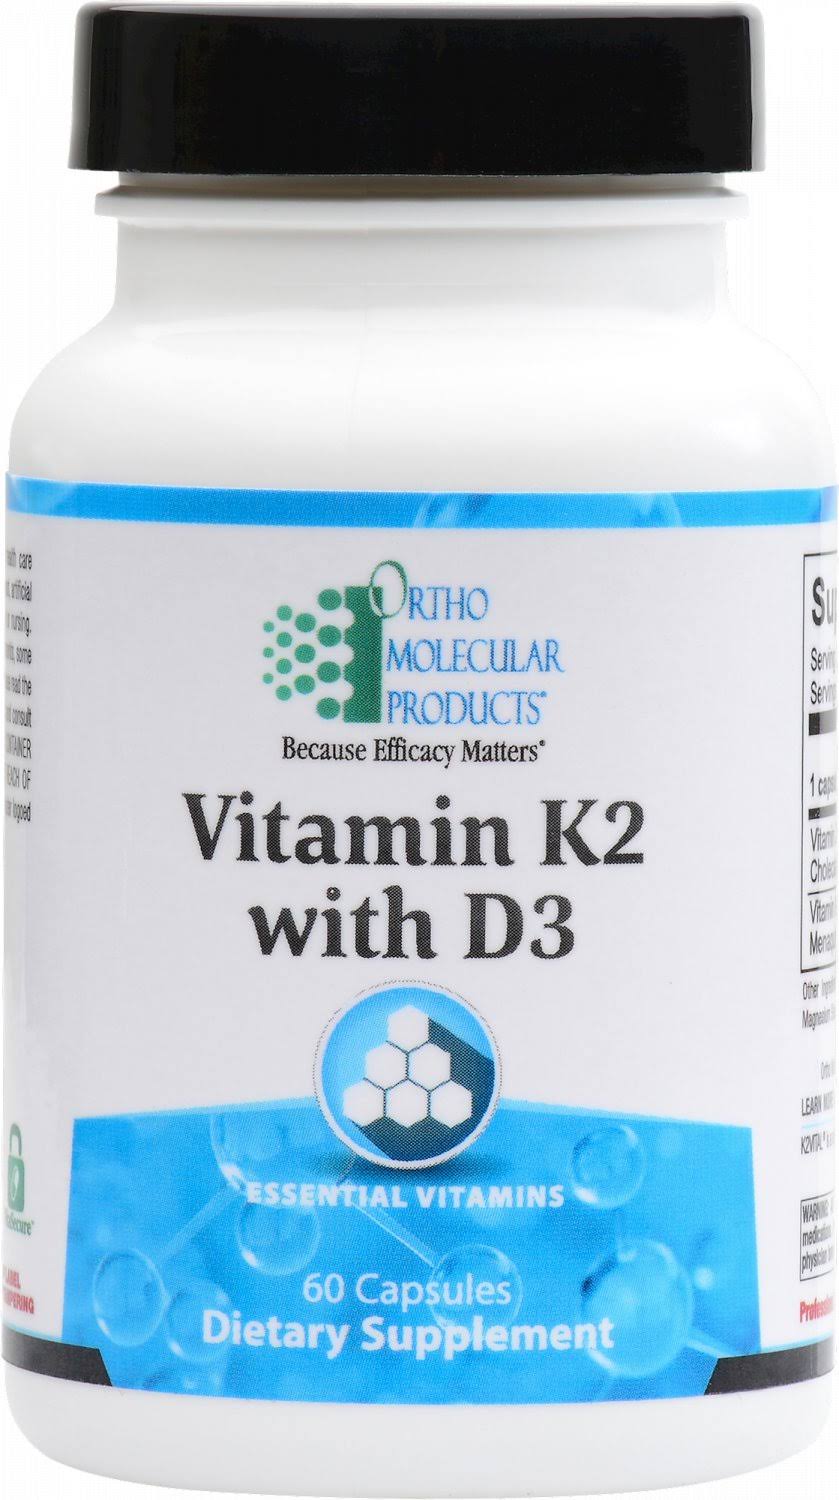 Ortho Molecular Products Vitamin K2 with D3 Supplement - 60ct